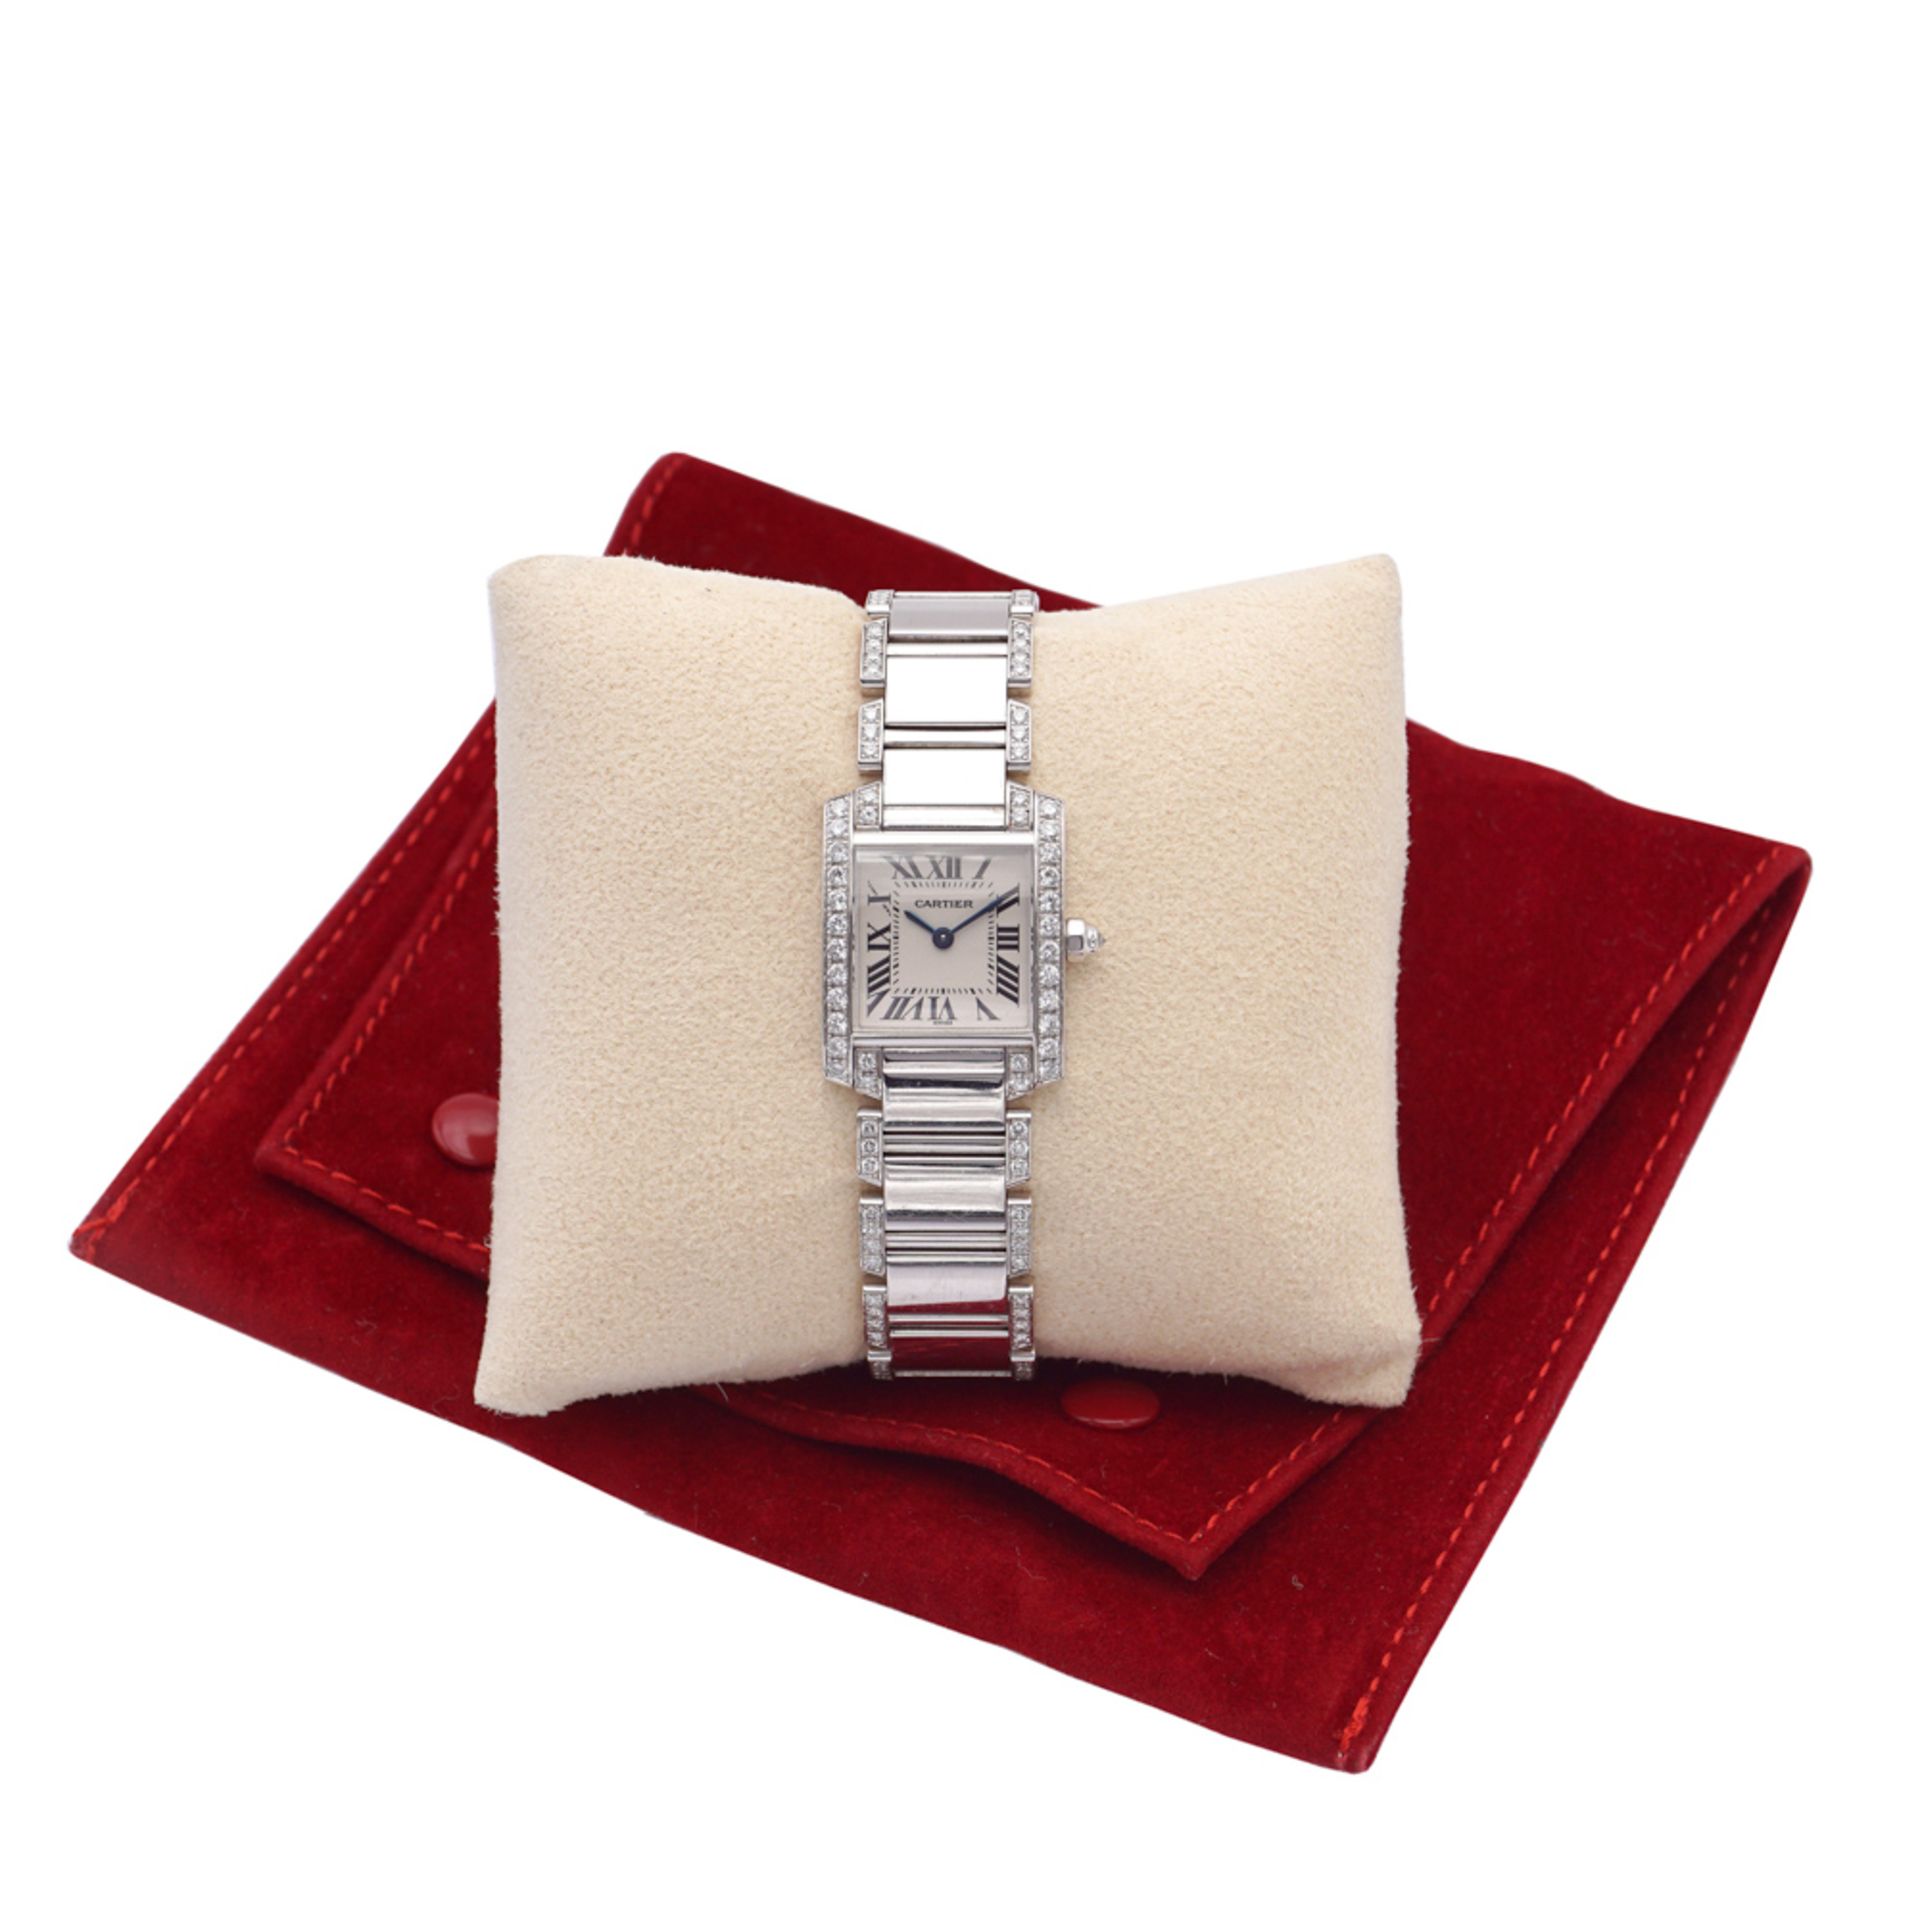 Cartier Tank Francaise, ladies watch - Image 2 of 3